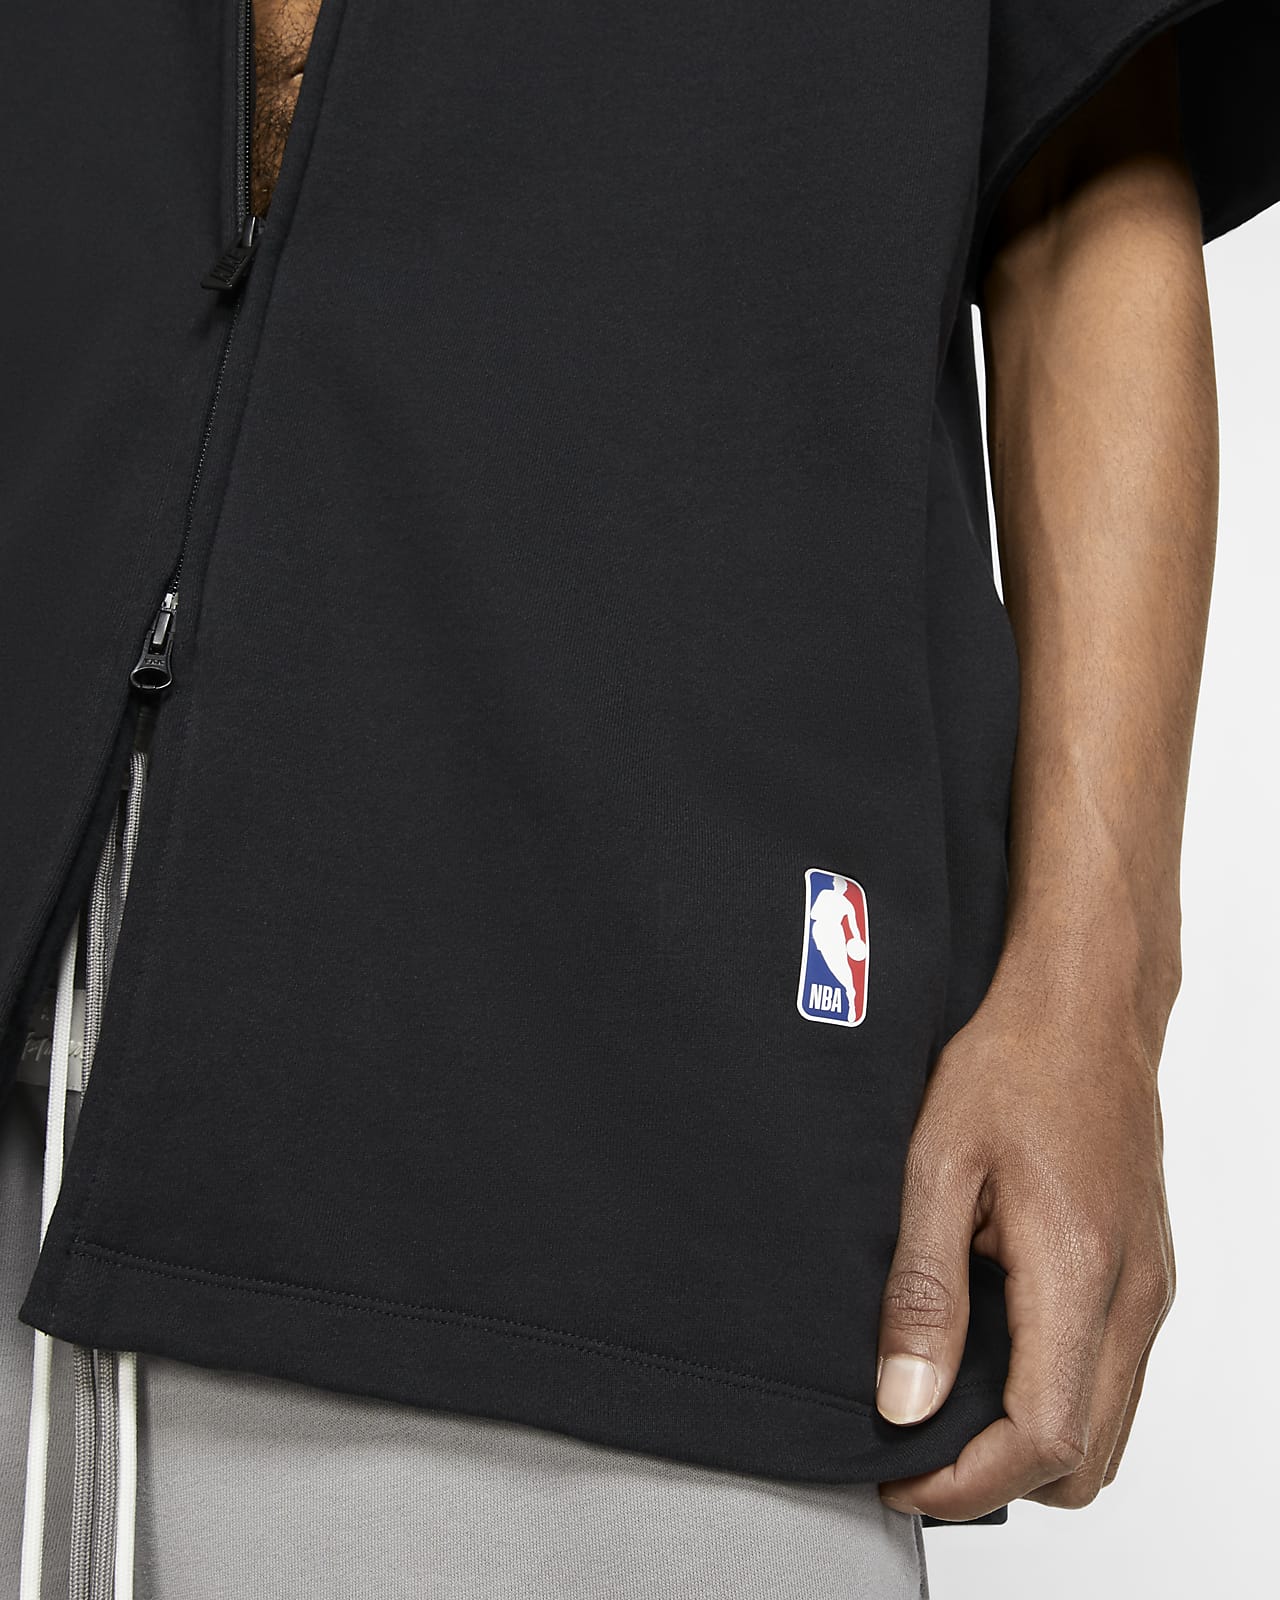 S Nike Fear of GOD Warm Up Top Black